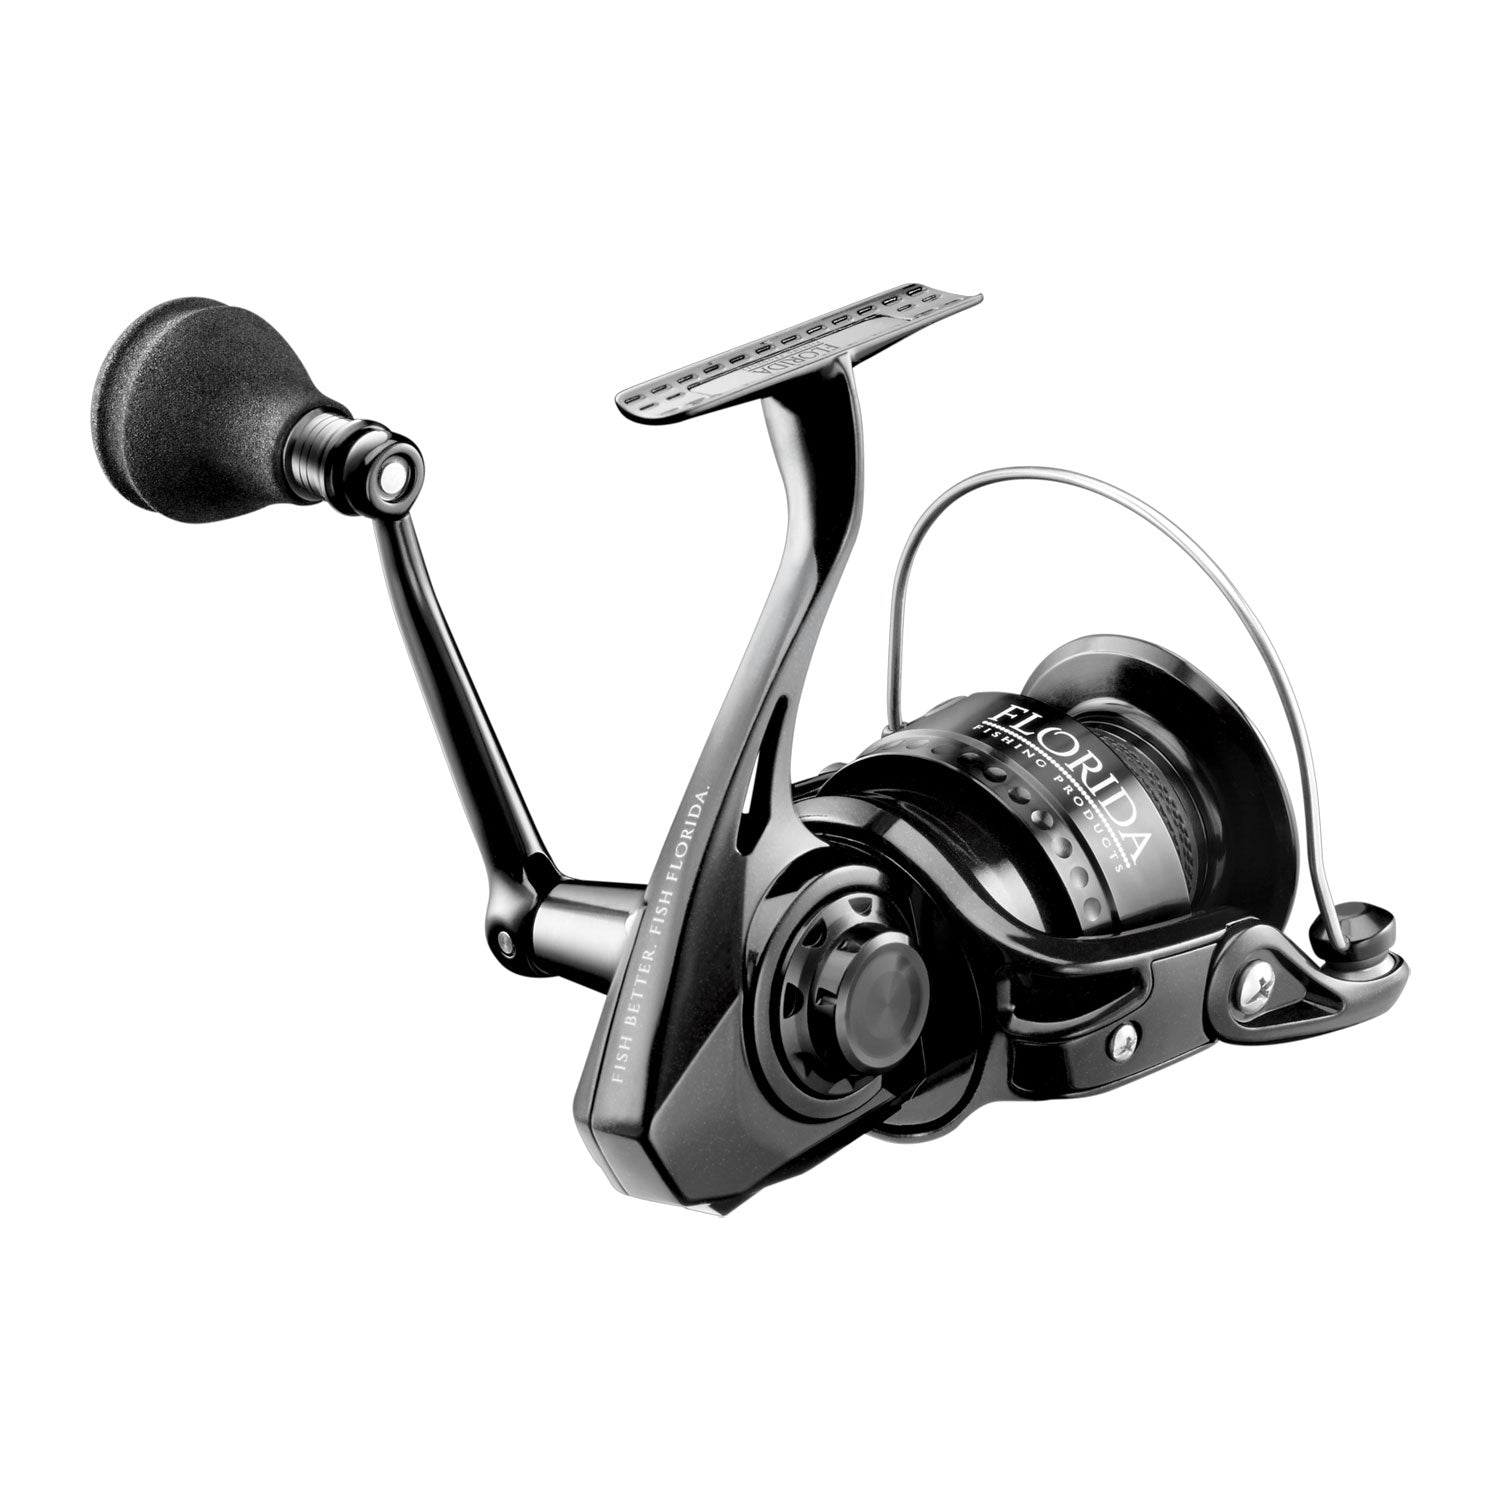 Florida Fishing Products Osprey SS Spinning Reel 4000